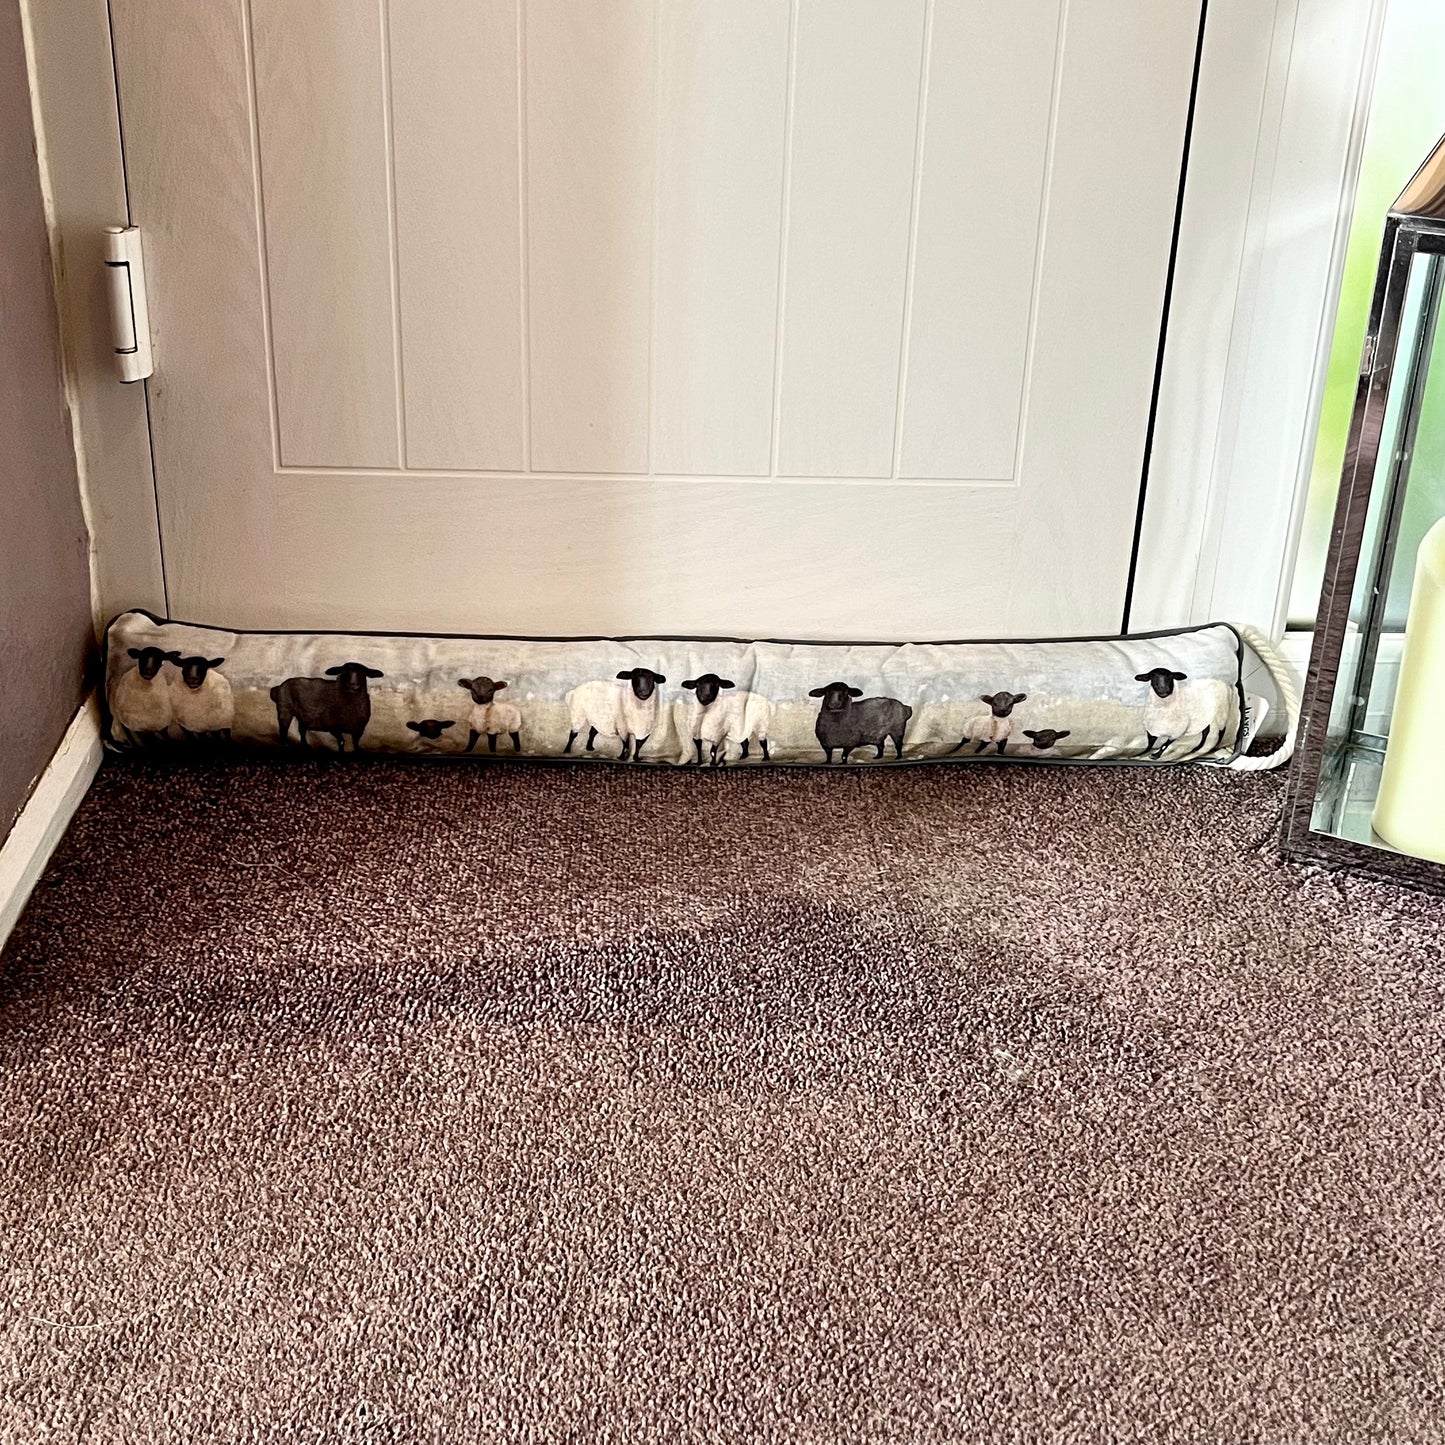 Sheep Draught Excluder Displayed In Front of Door